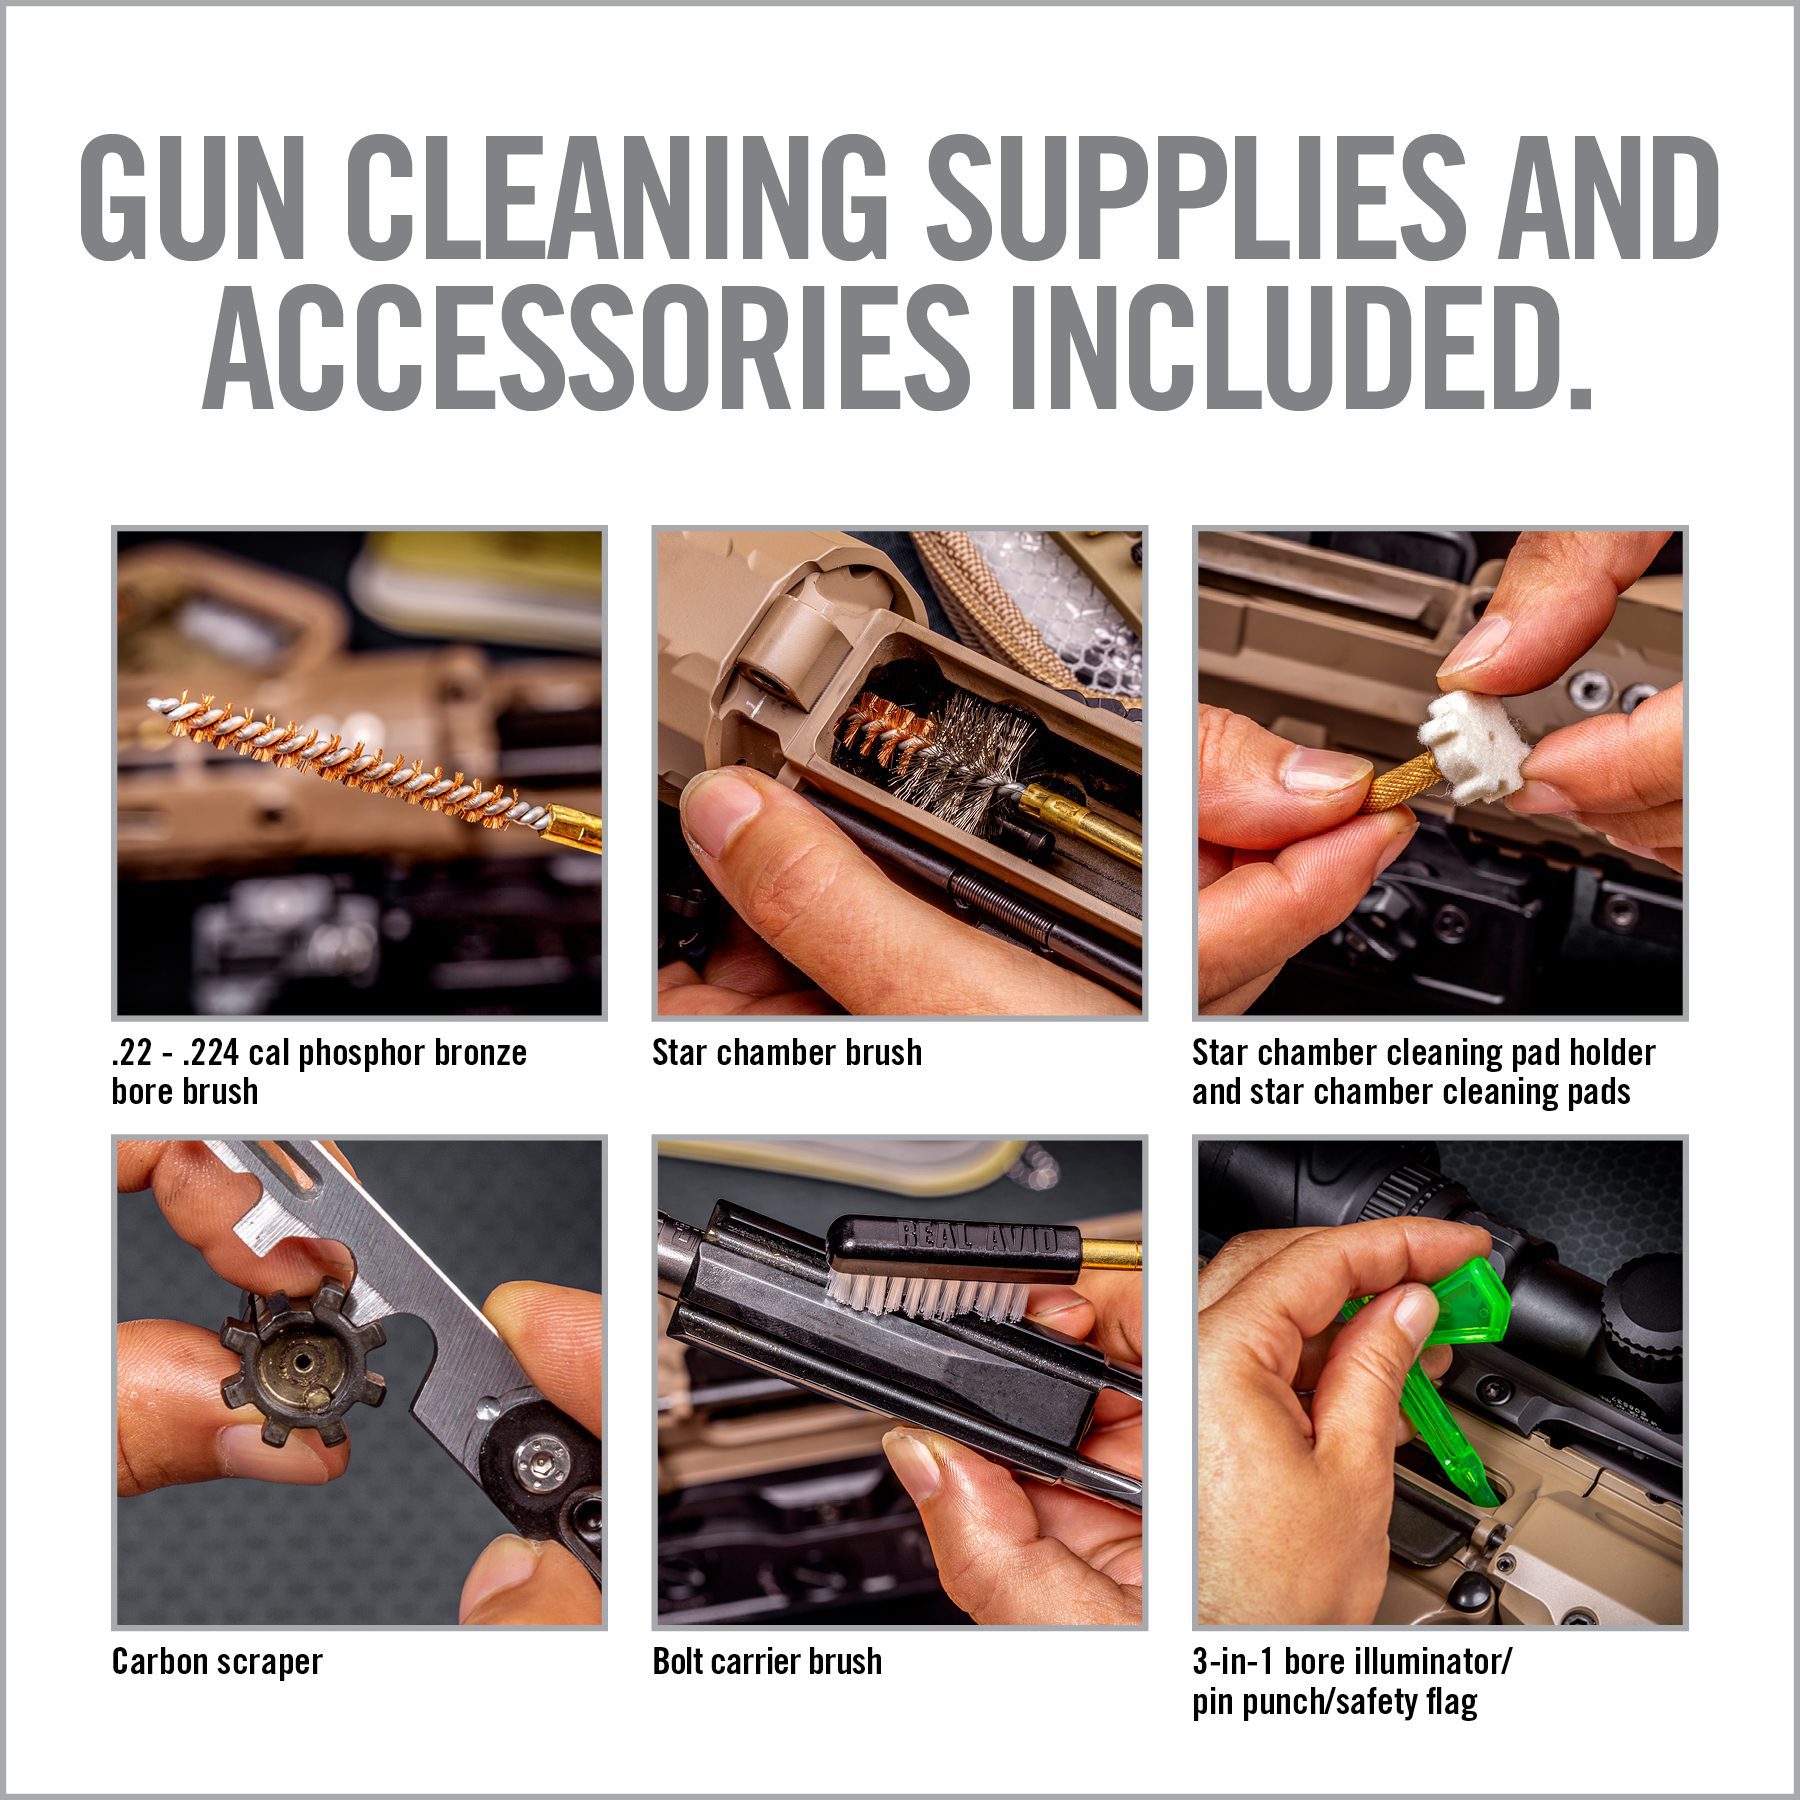 the instructions for gun cleaning supplies and accessories included